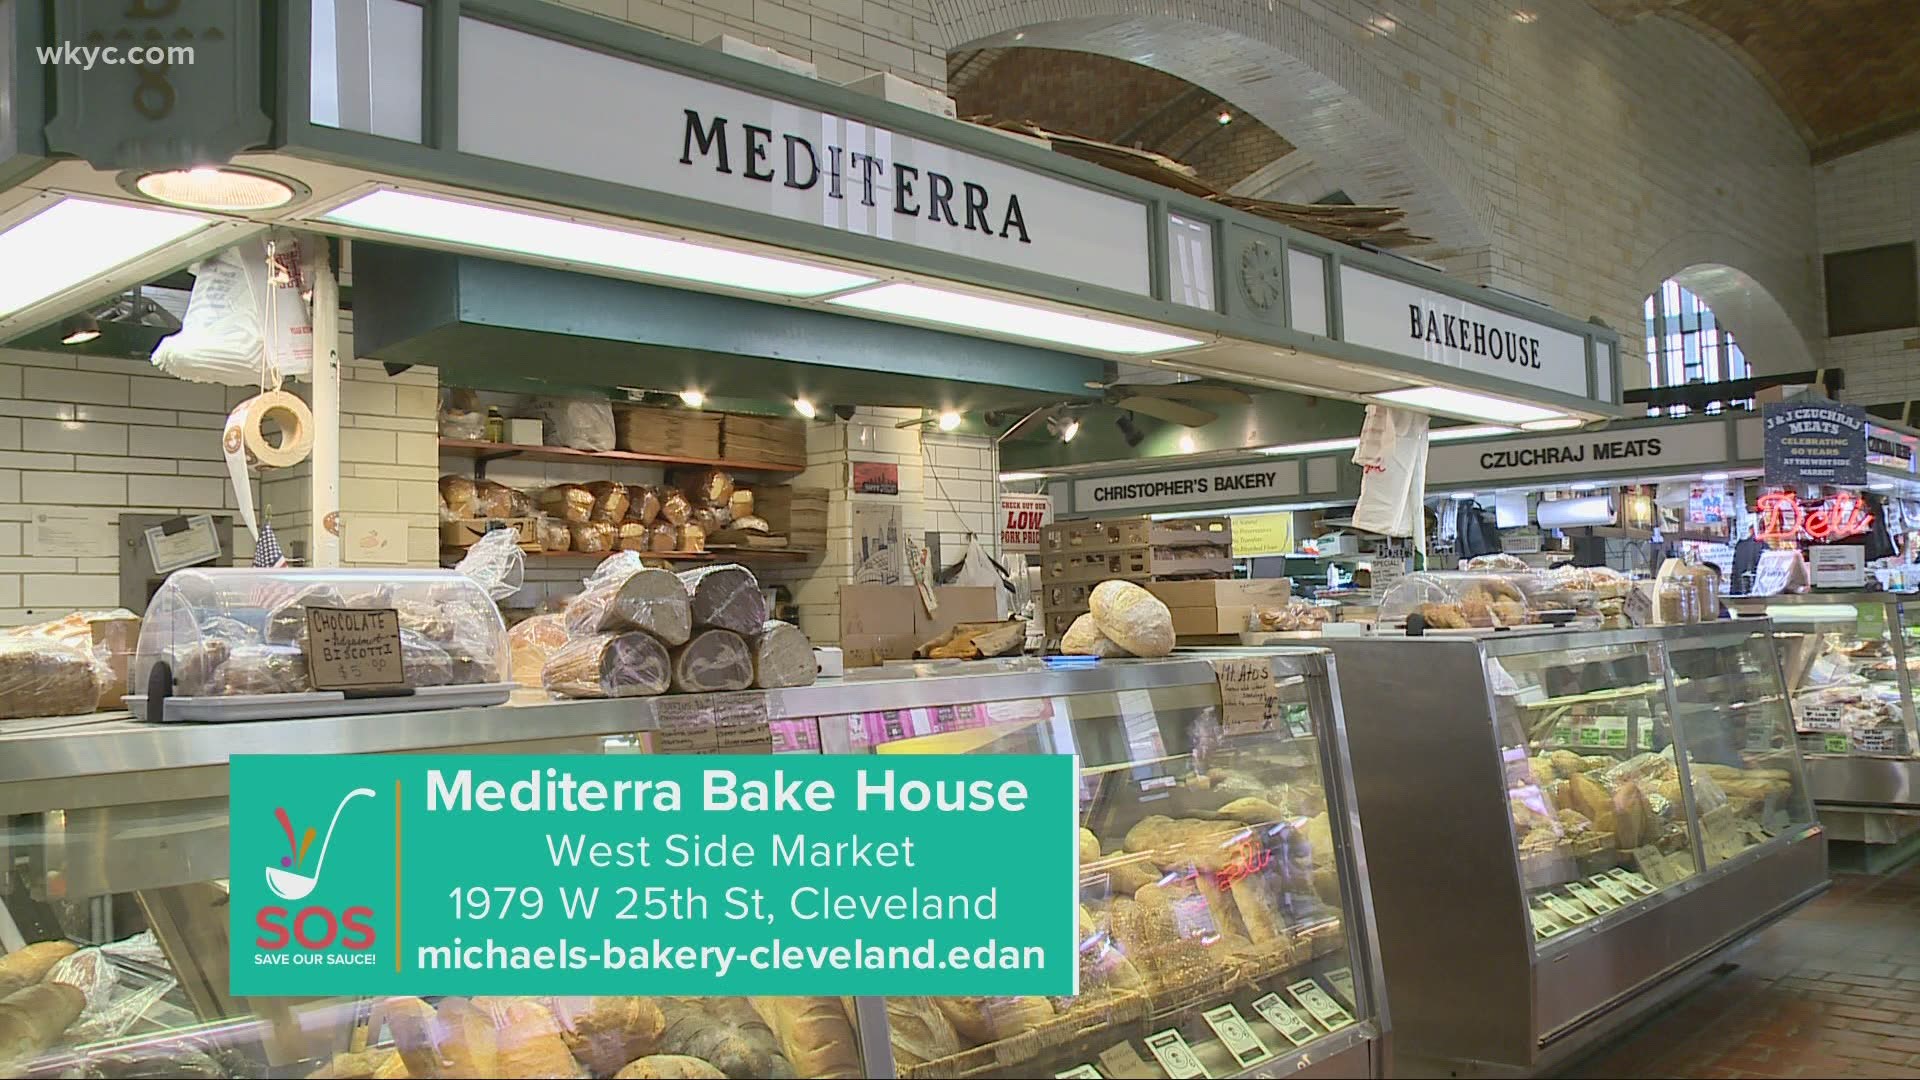 We're highlighting the Mediterra Bake House at Cleveland's West Side Market for 'Save Our Sauce,' which is being done to support the local food industry amid COVIC.